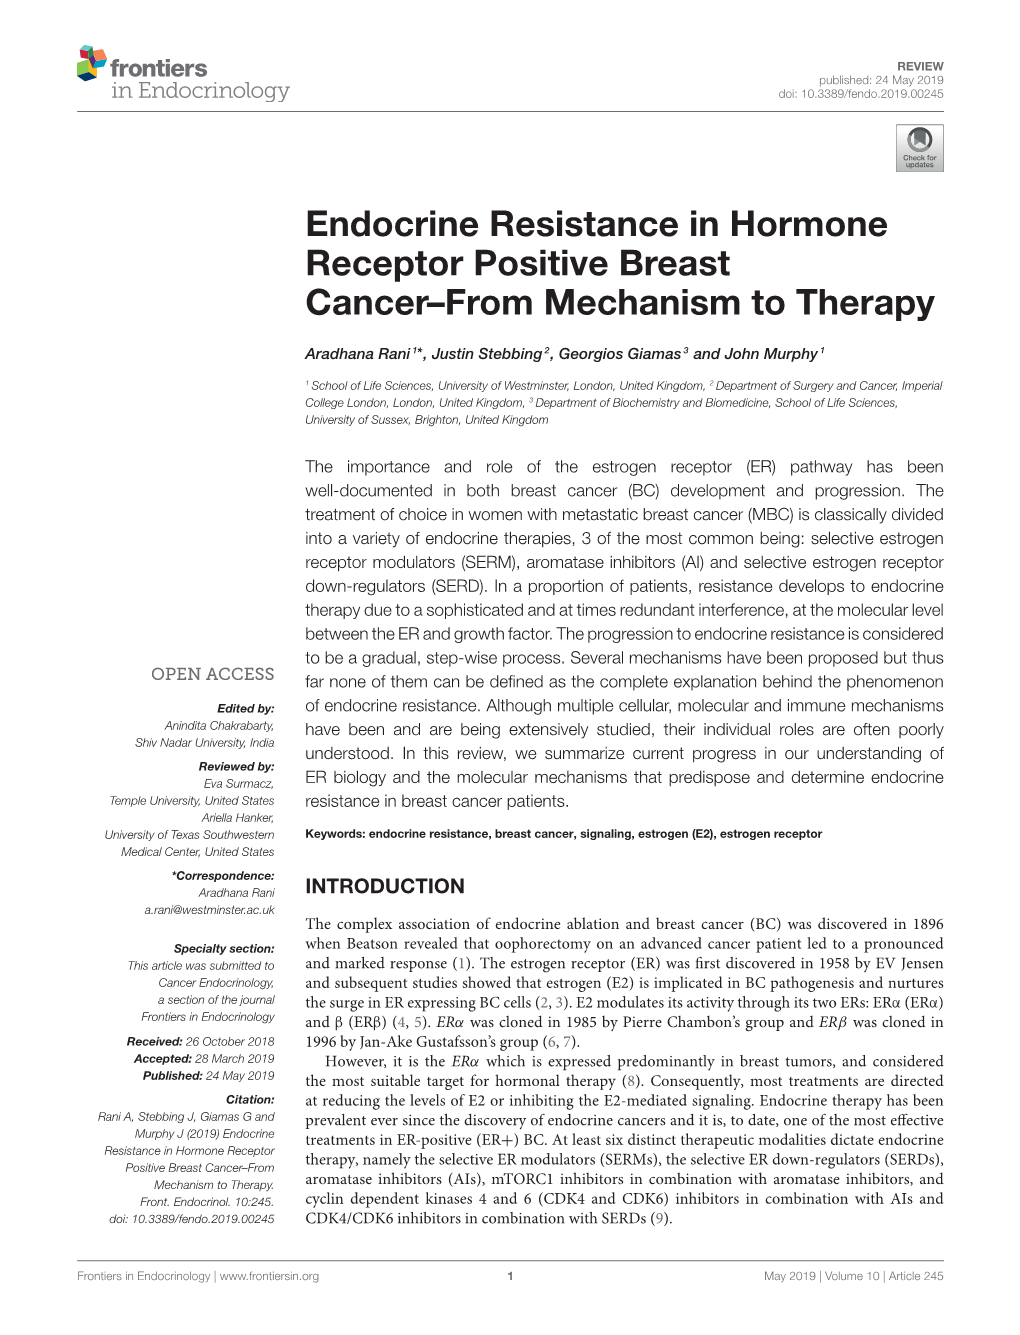 Endocrine Resistance in Hormone Receptor Positive Breast Cancer–From Mechanism to Therapy